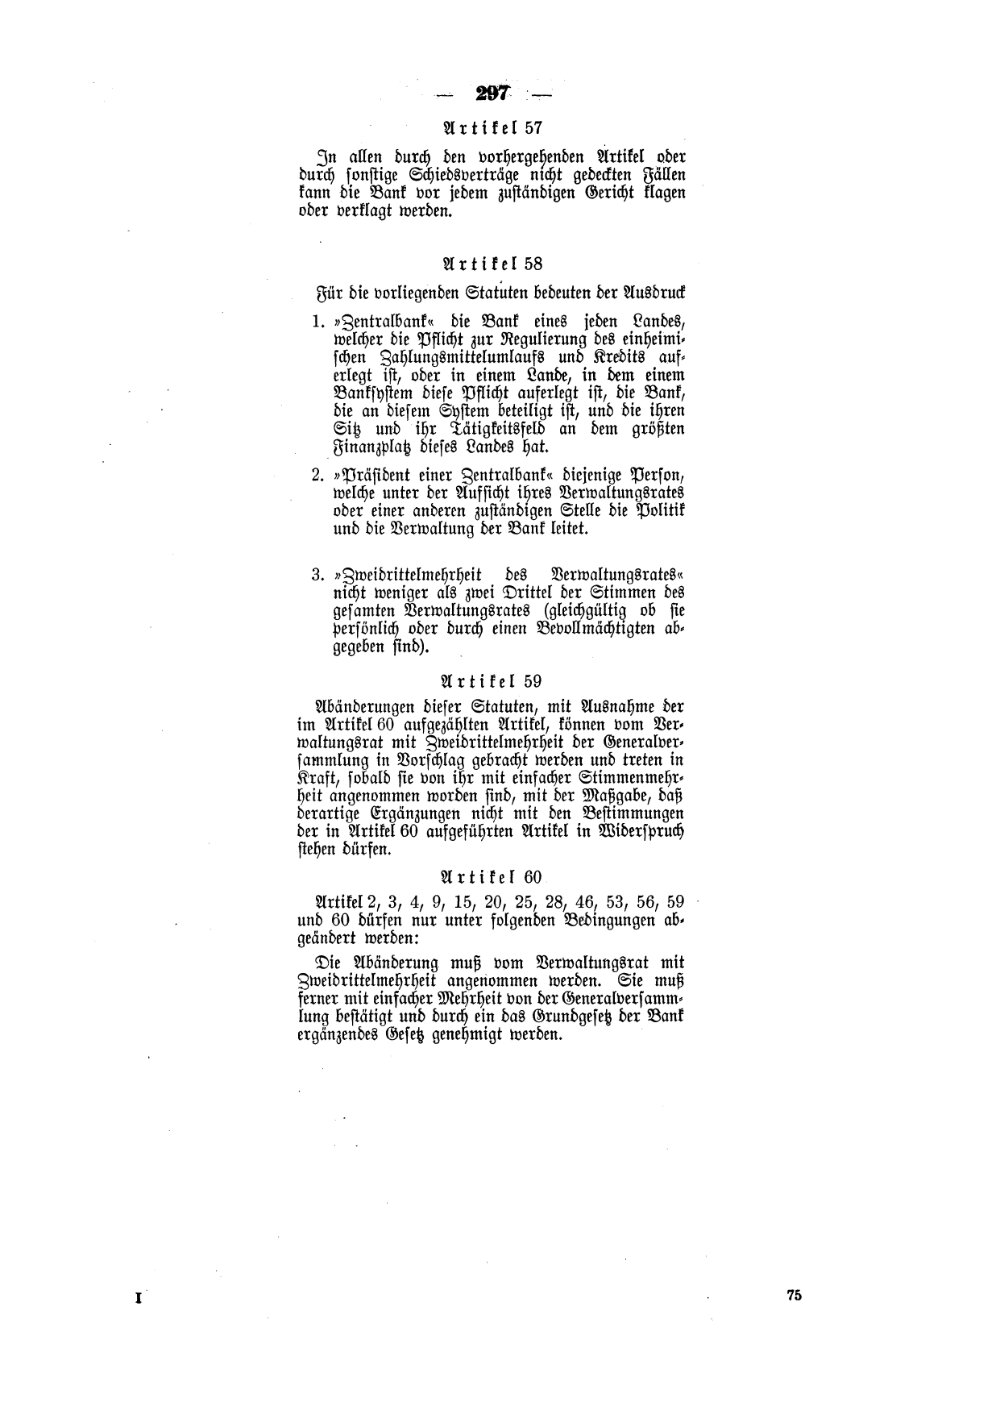 Scan of page 297